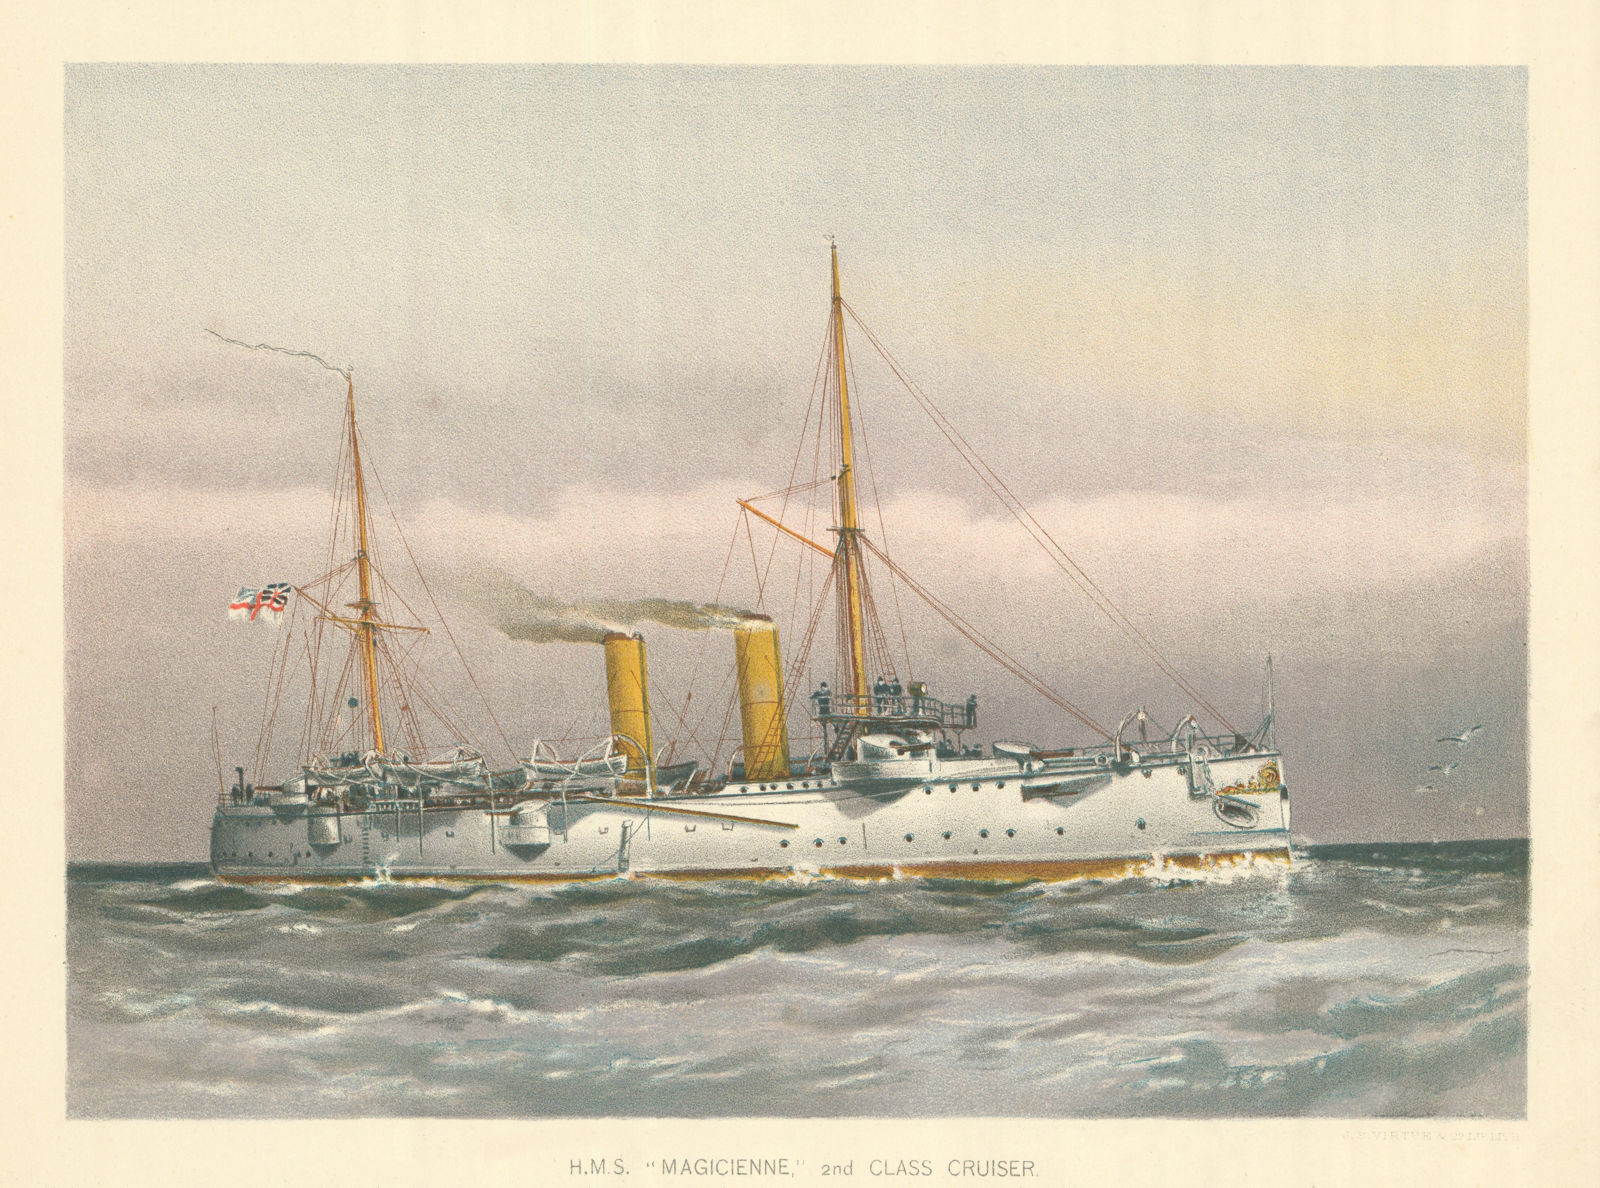 Associate Product H.M.S. "Magicienne" - 2nd class cruiser (1888) by W.F. Mitchell. Royal Navy 1893